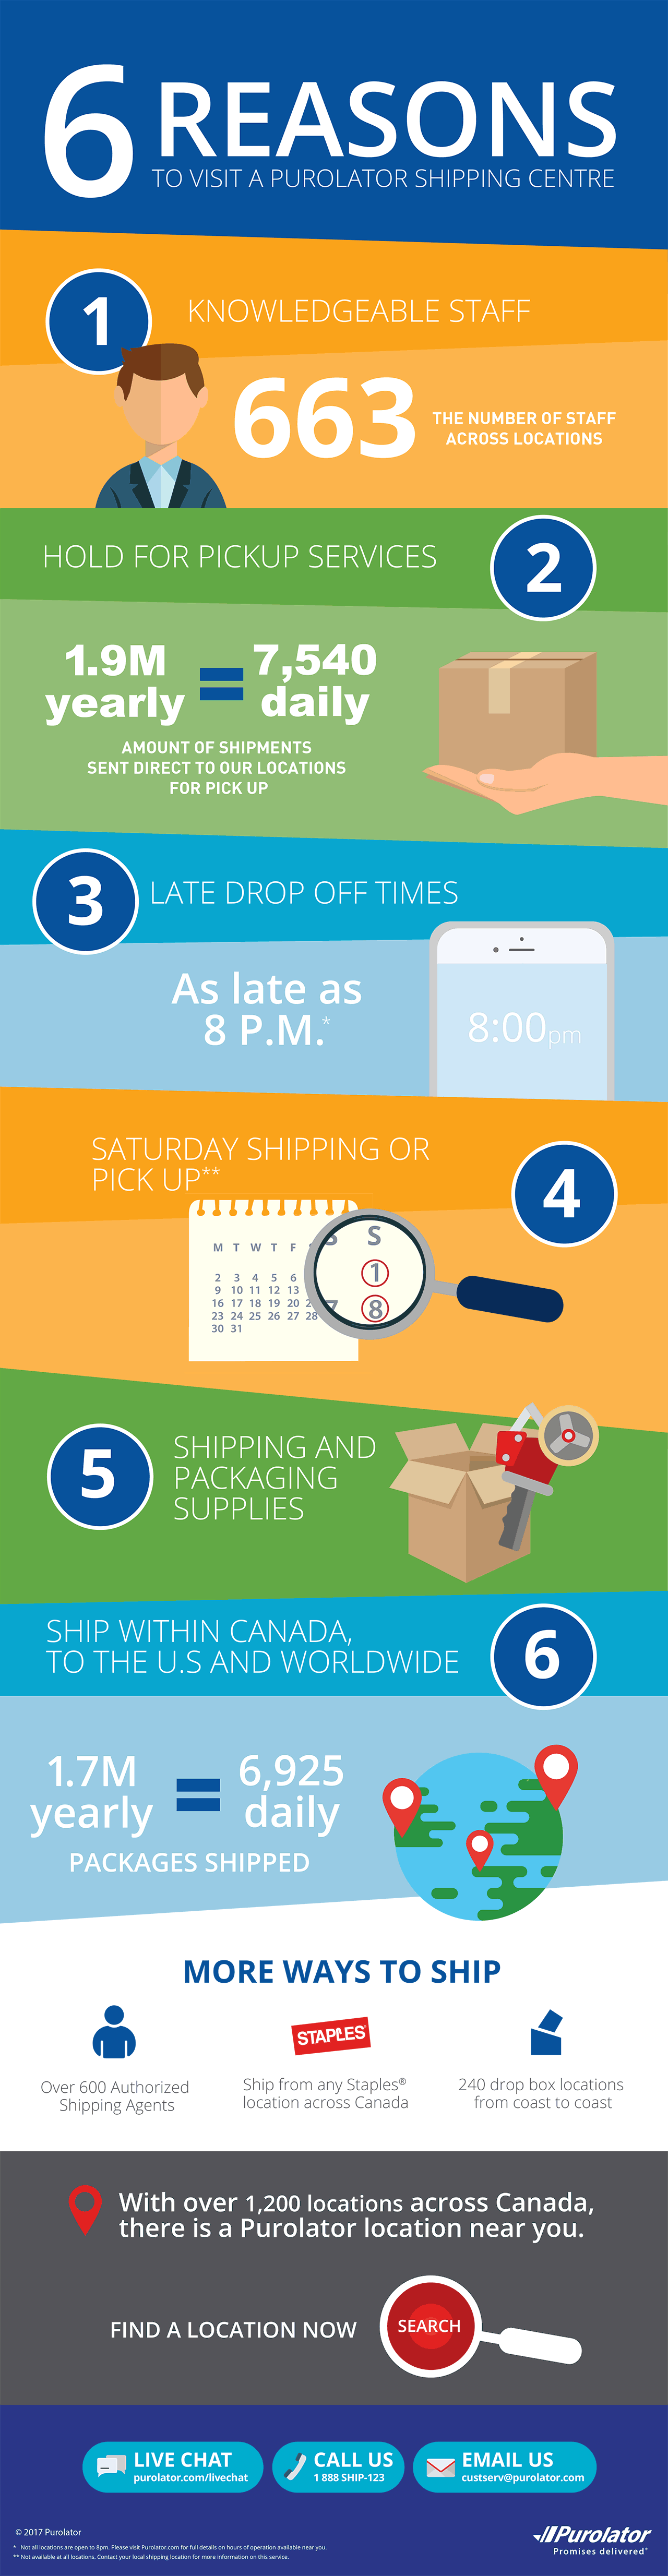 Six reasons why you should visit a Purolator shipping centre, infographic